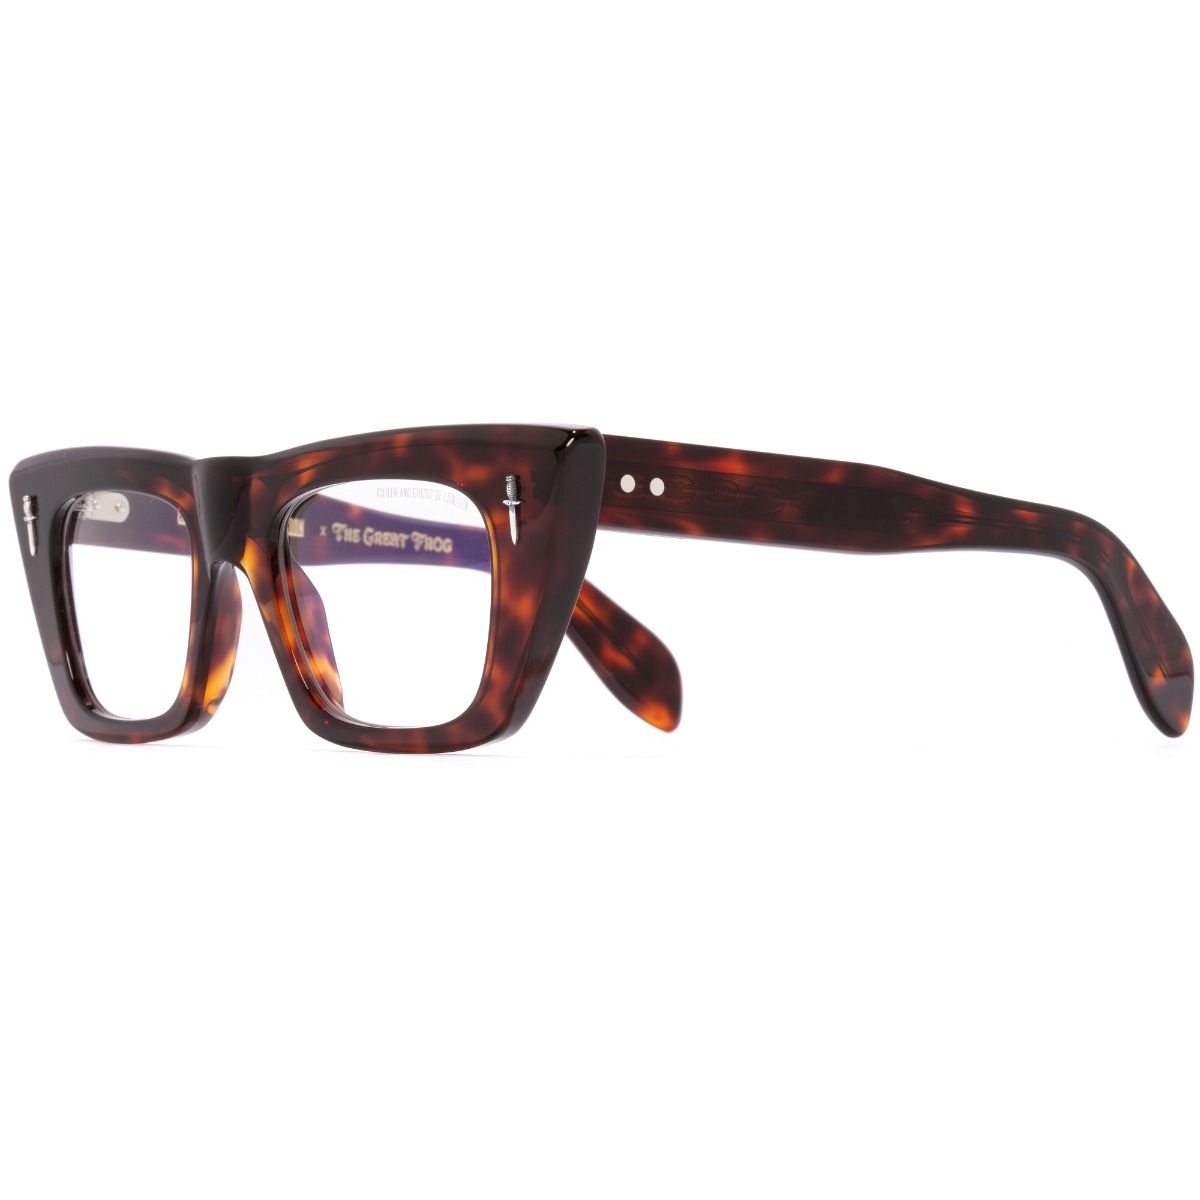 The Great Frog Love And Death Cat Eye Optical Glasses-Dark Turtle